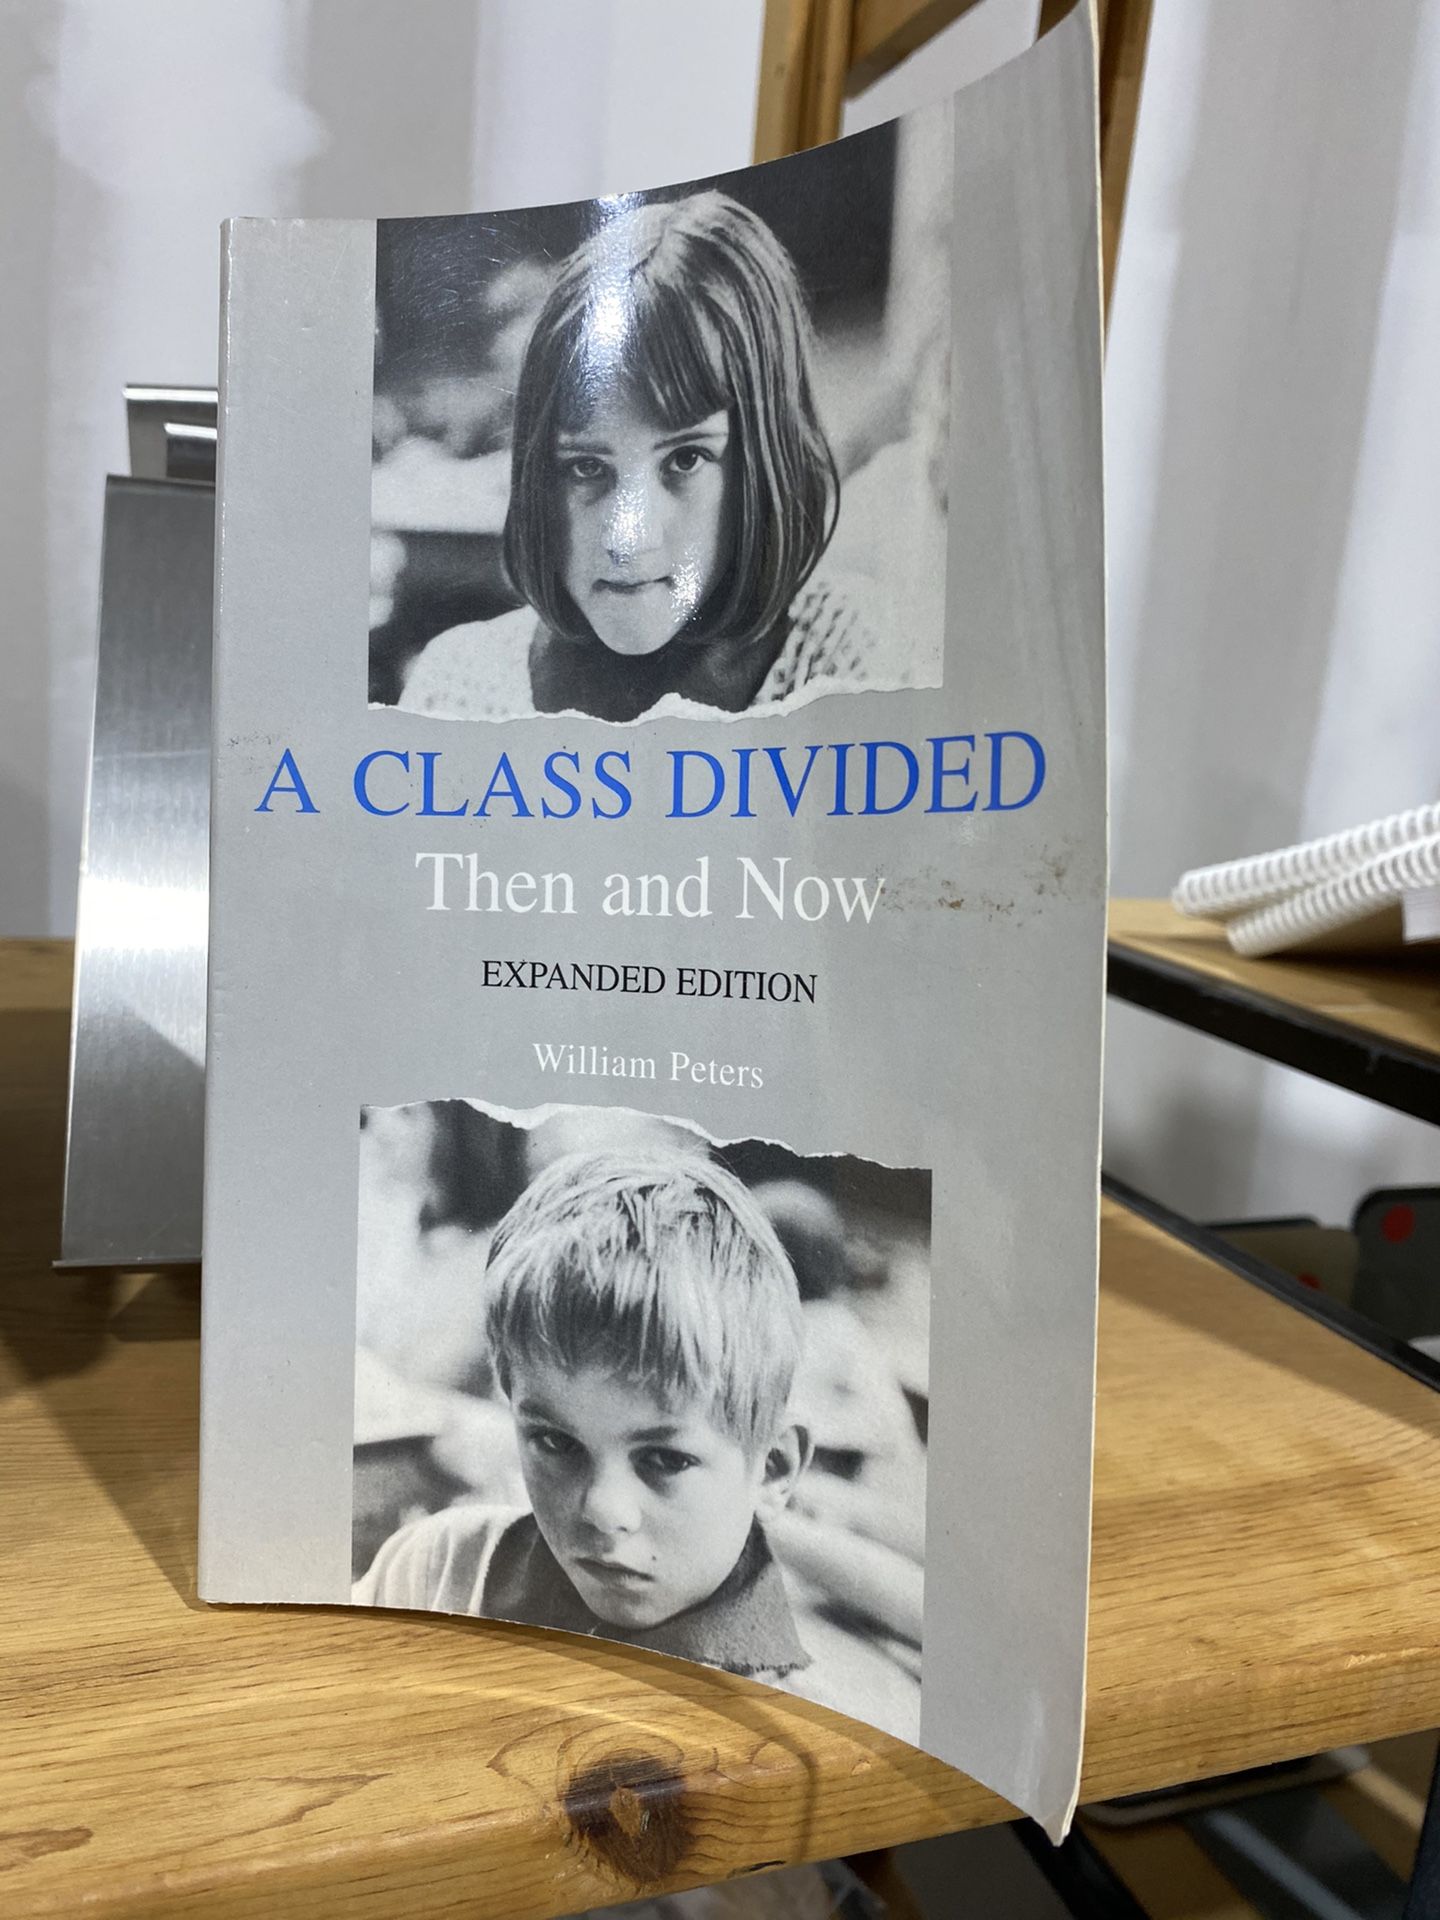 Book: A class divided Then and now by William Peters